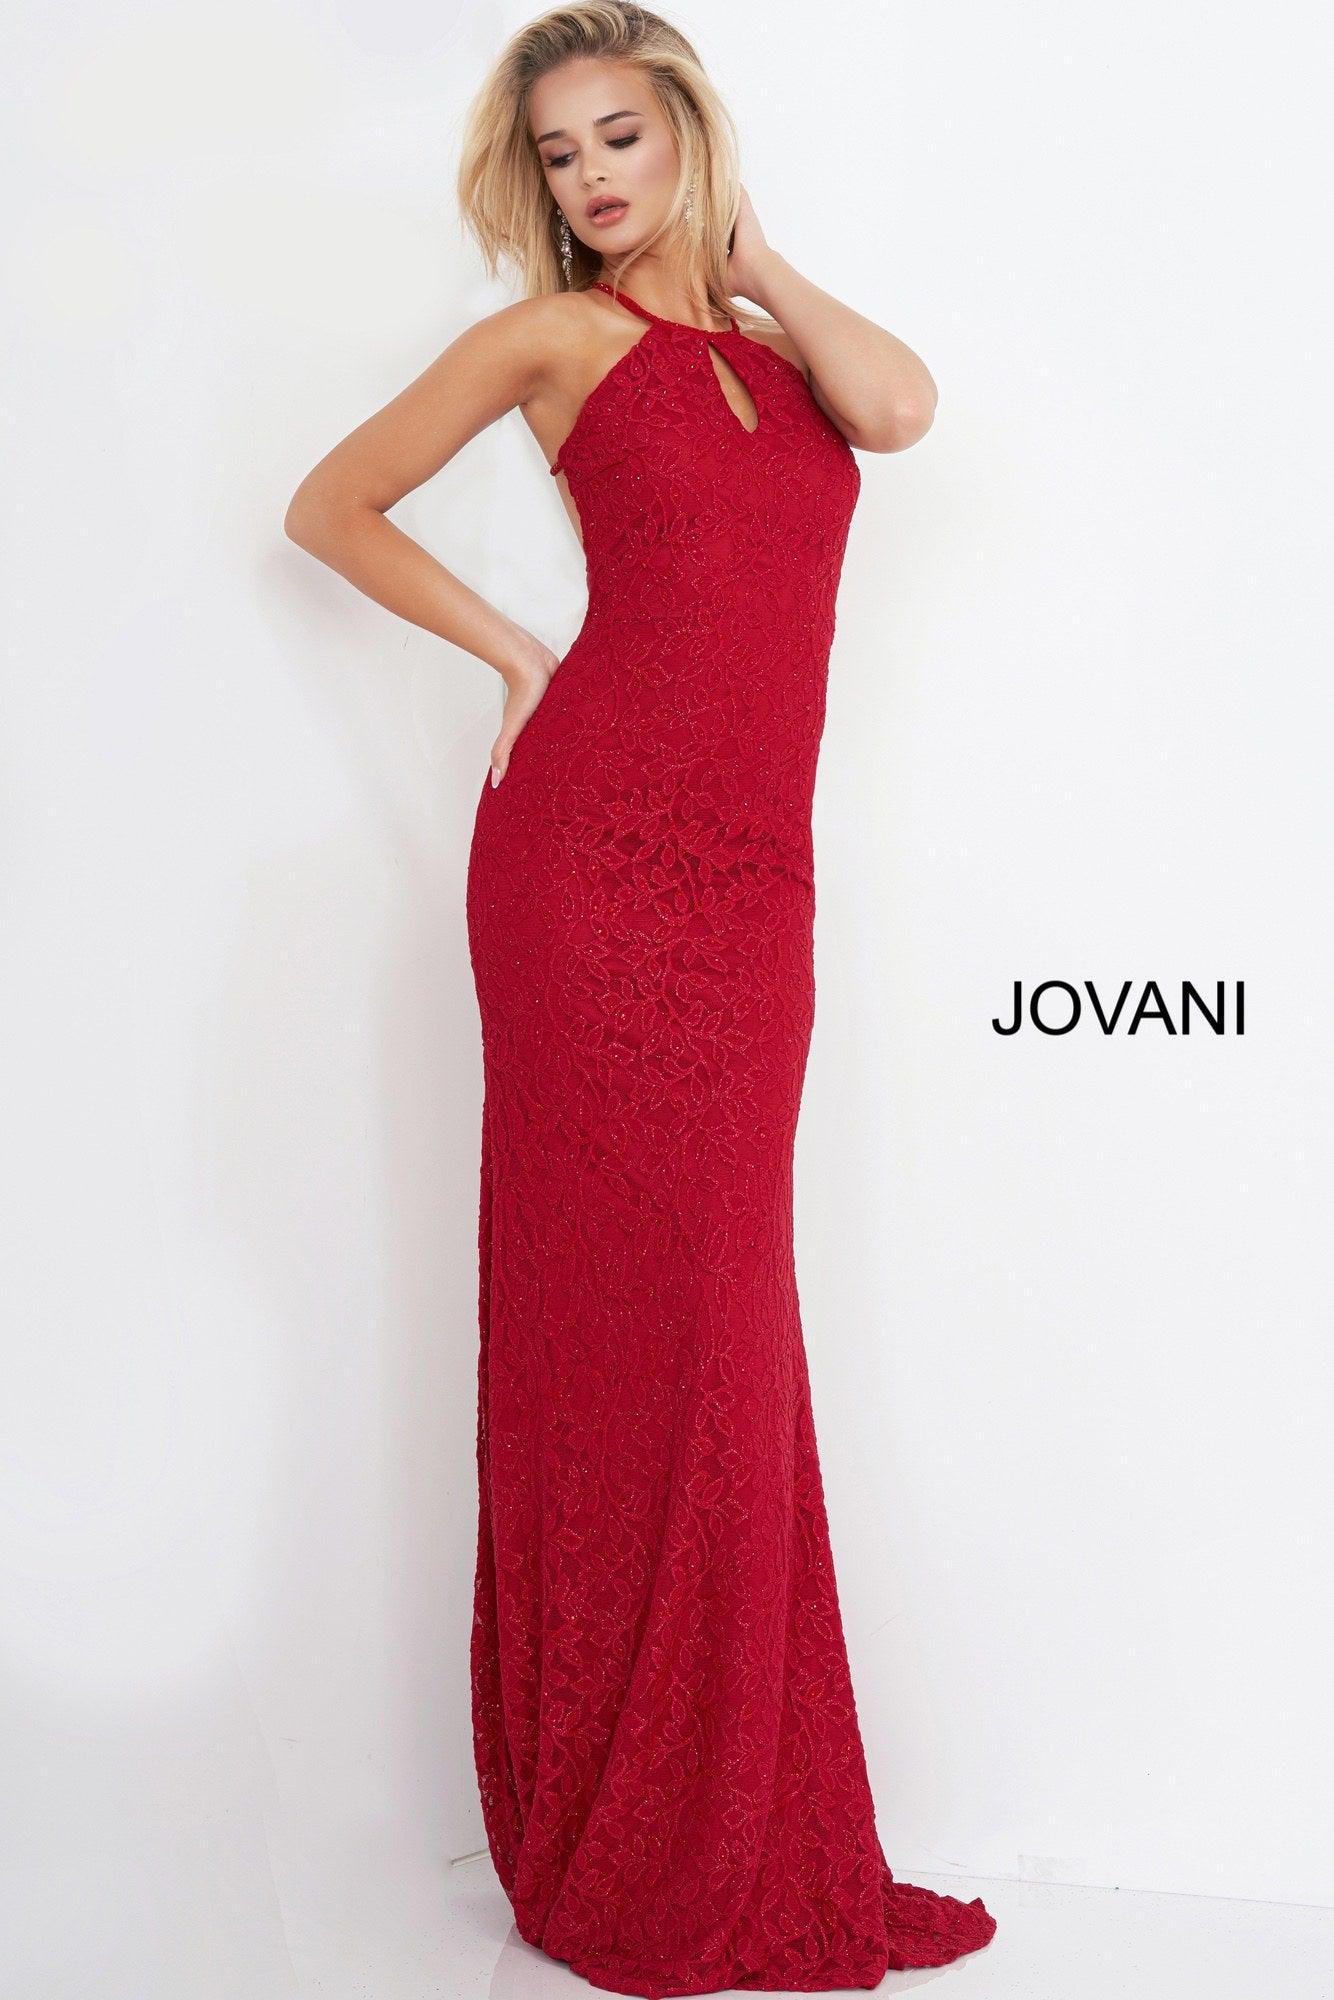 Jovani Long Formal Lace Prom Dress 4032 - The Dress Outlet